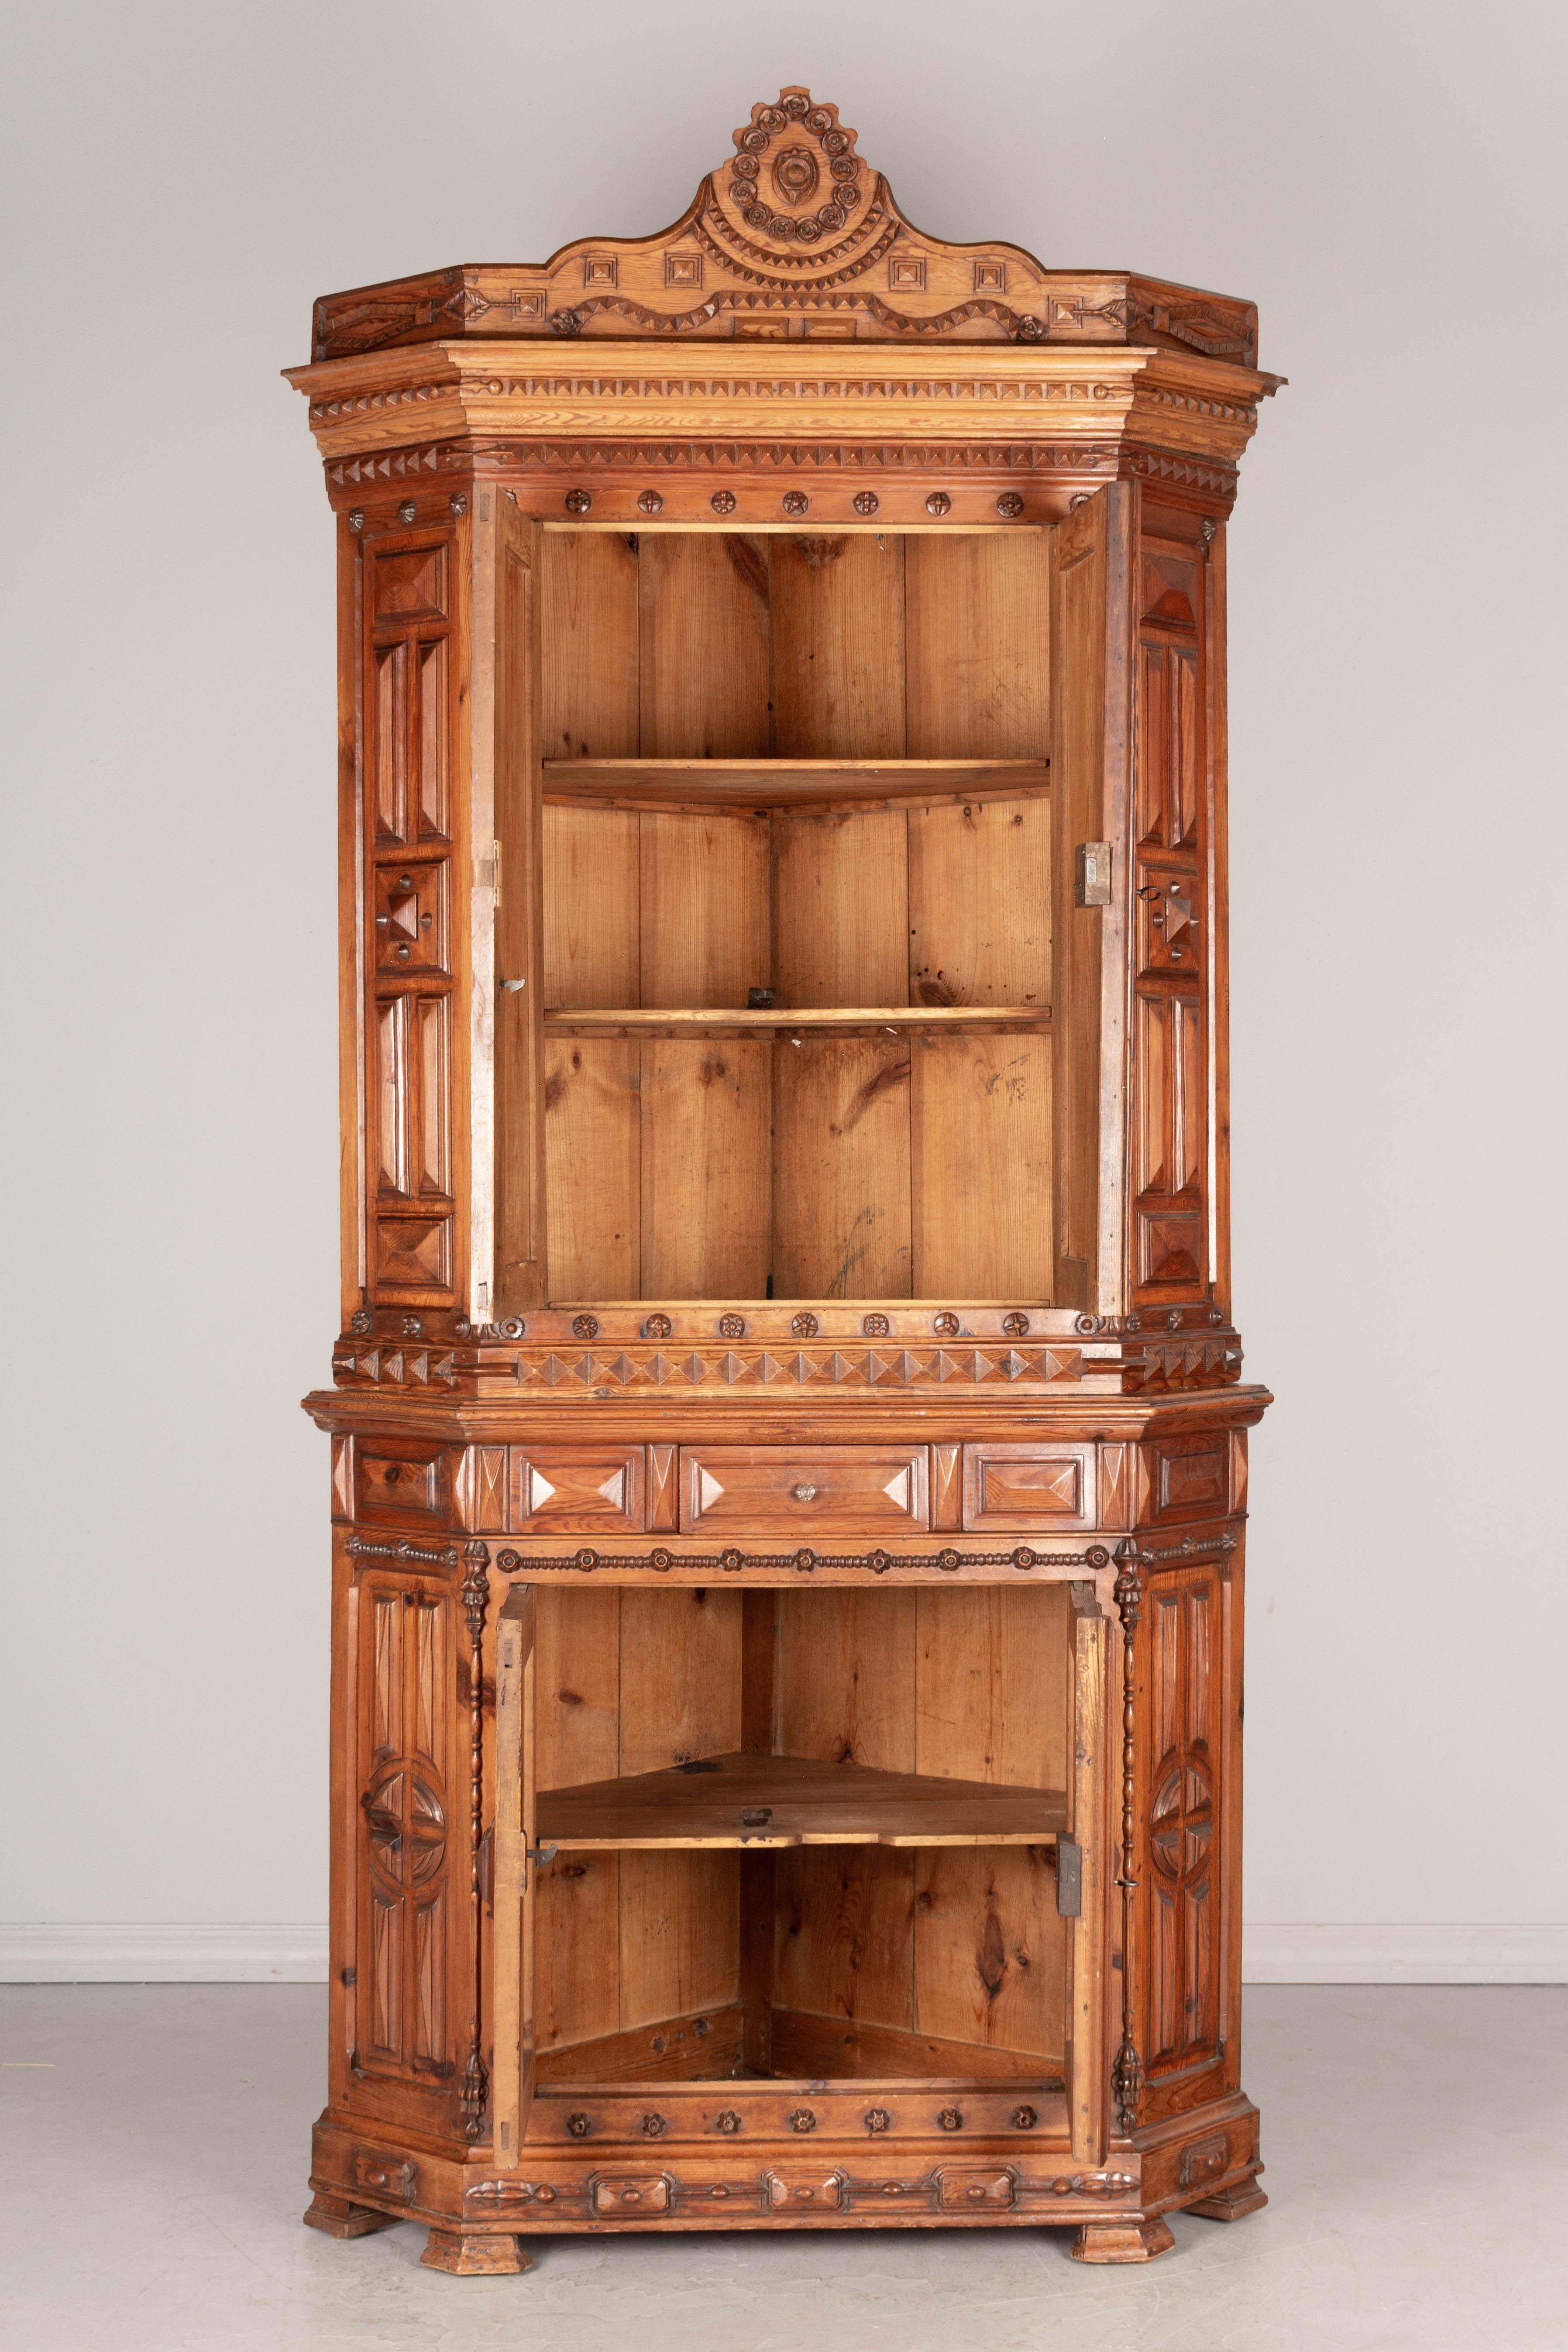 19th Century French Country Folk Art Corner Cabinet In Good Condition For Sale In Winter Park, FL